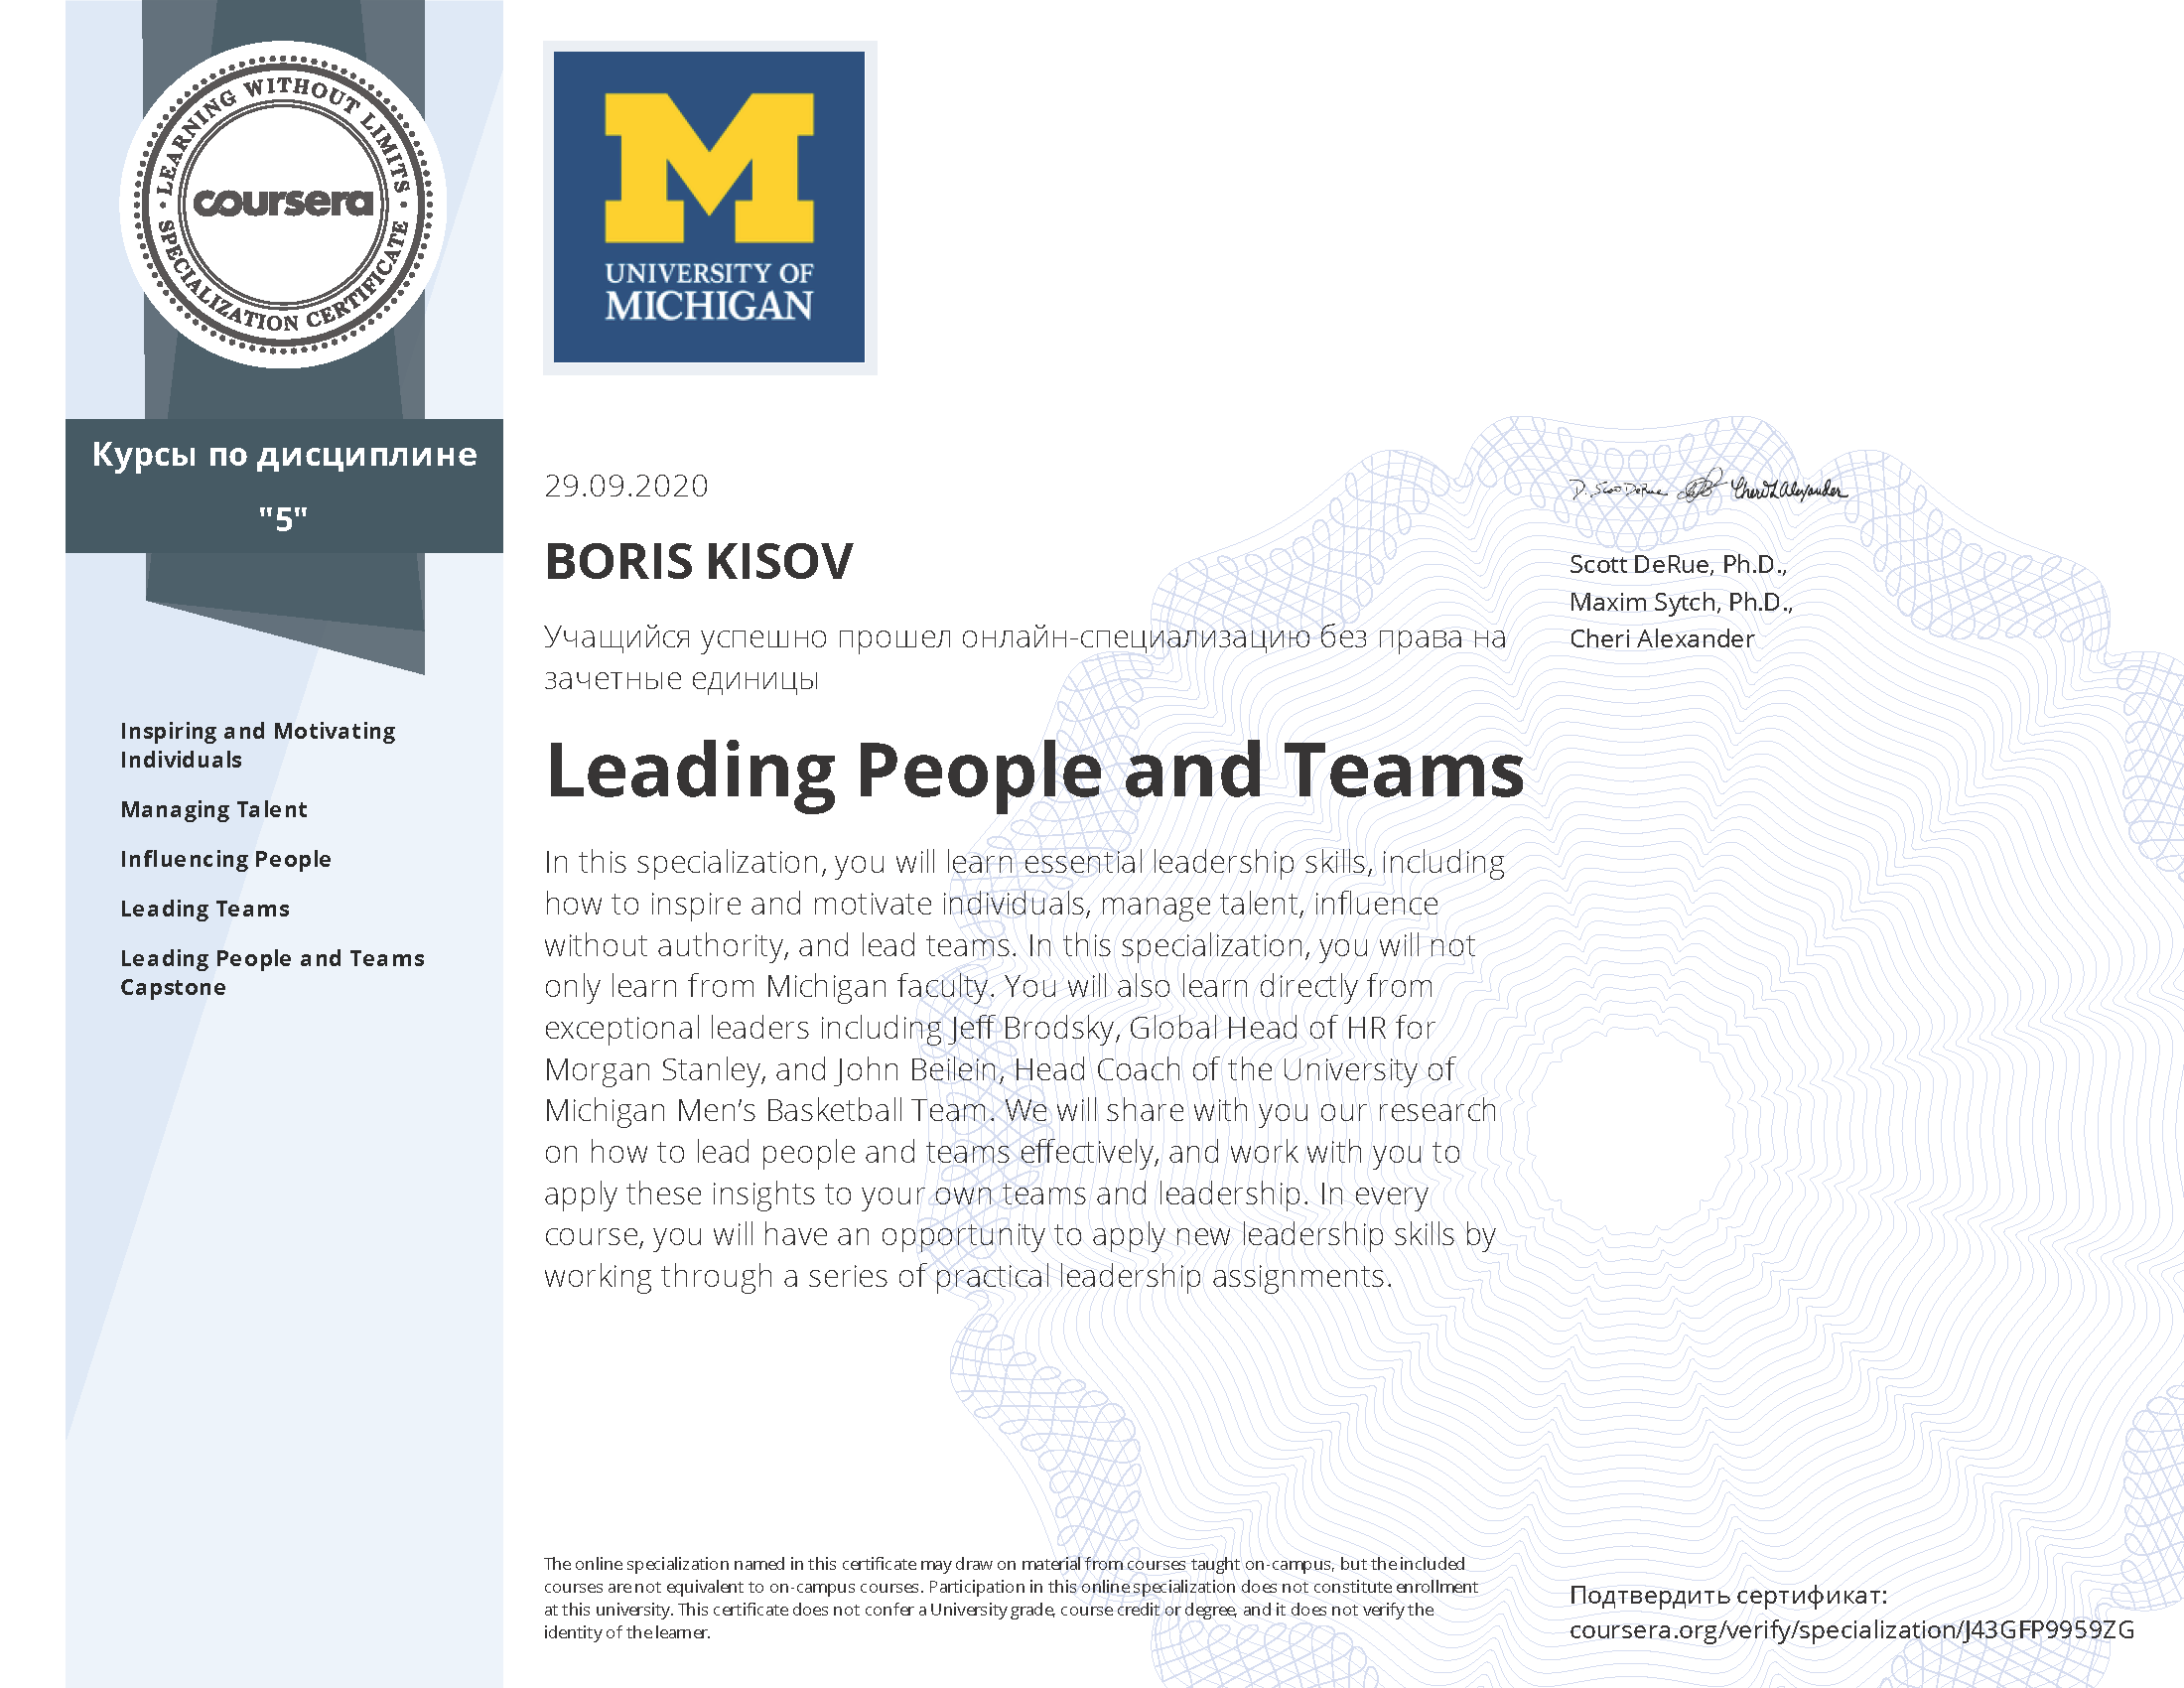 Leading People and Teams